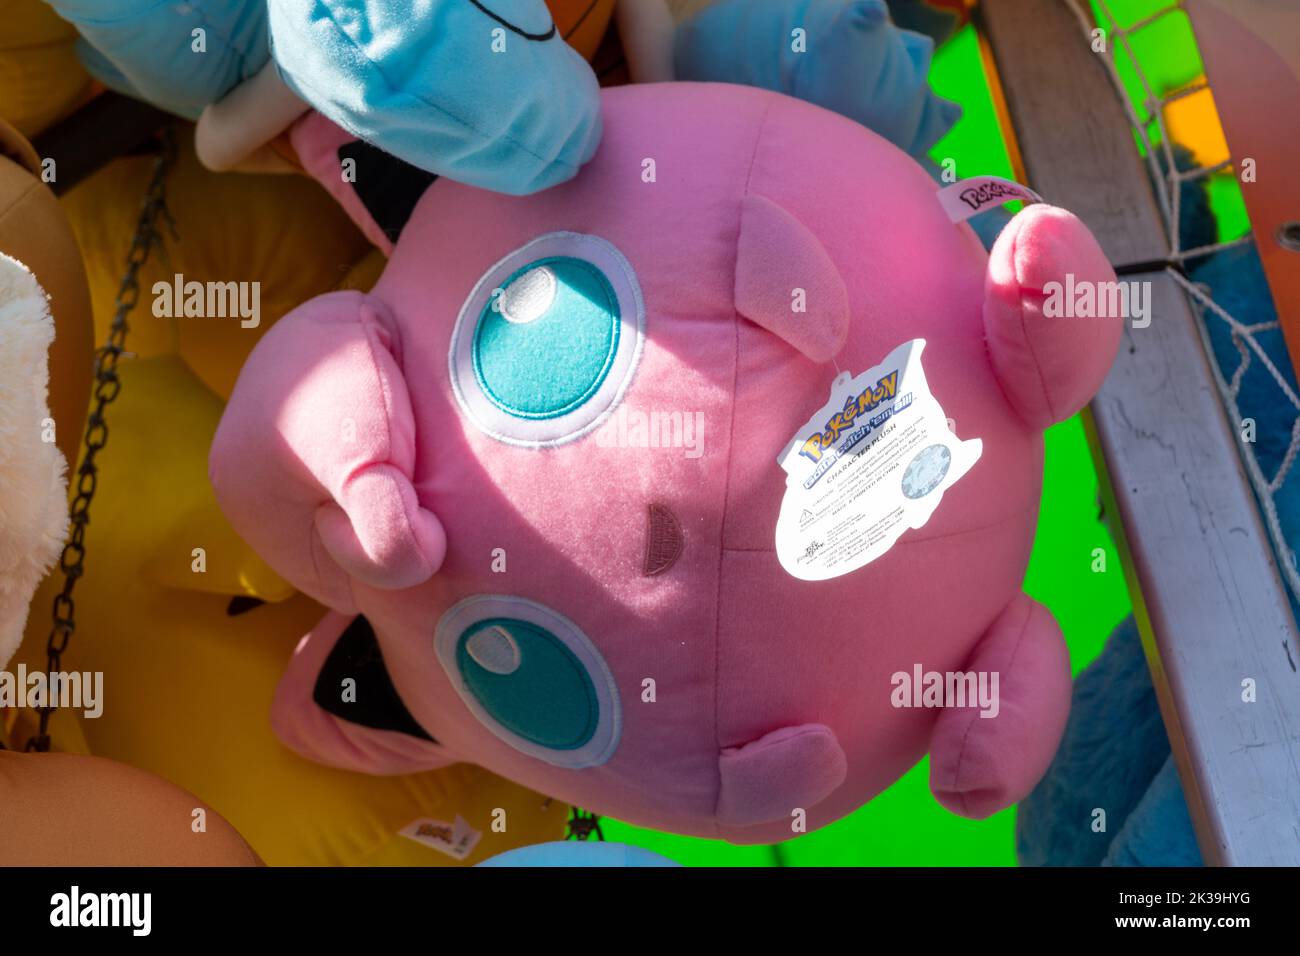 Calgary, Alberta, Canada - July 16, 2022: A Jigglypuff pokemon stuffed plush toy offered as a prize for winning a carnival game Stock Photo